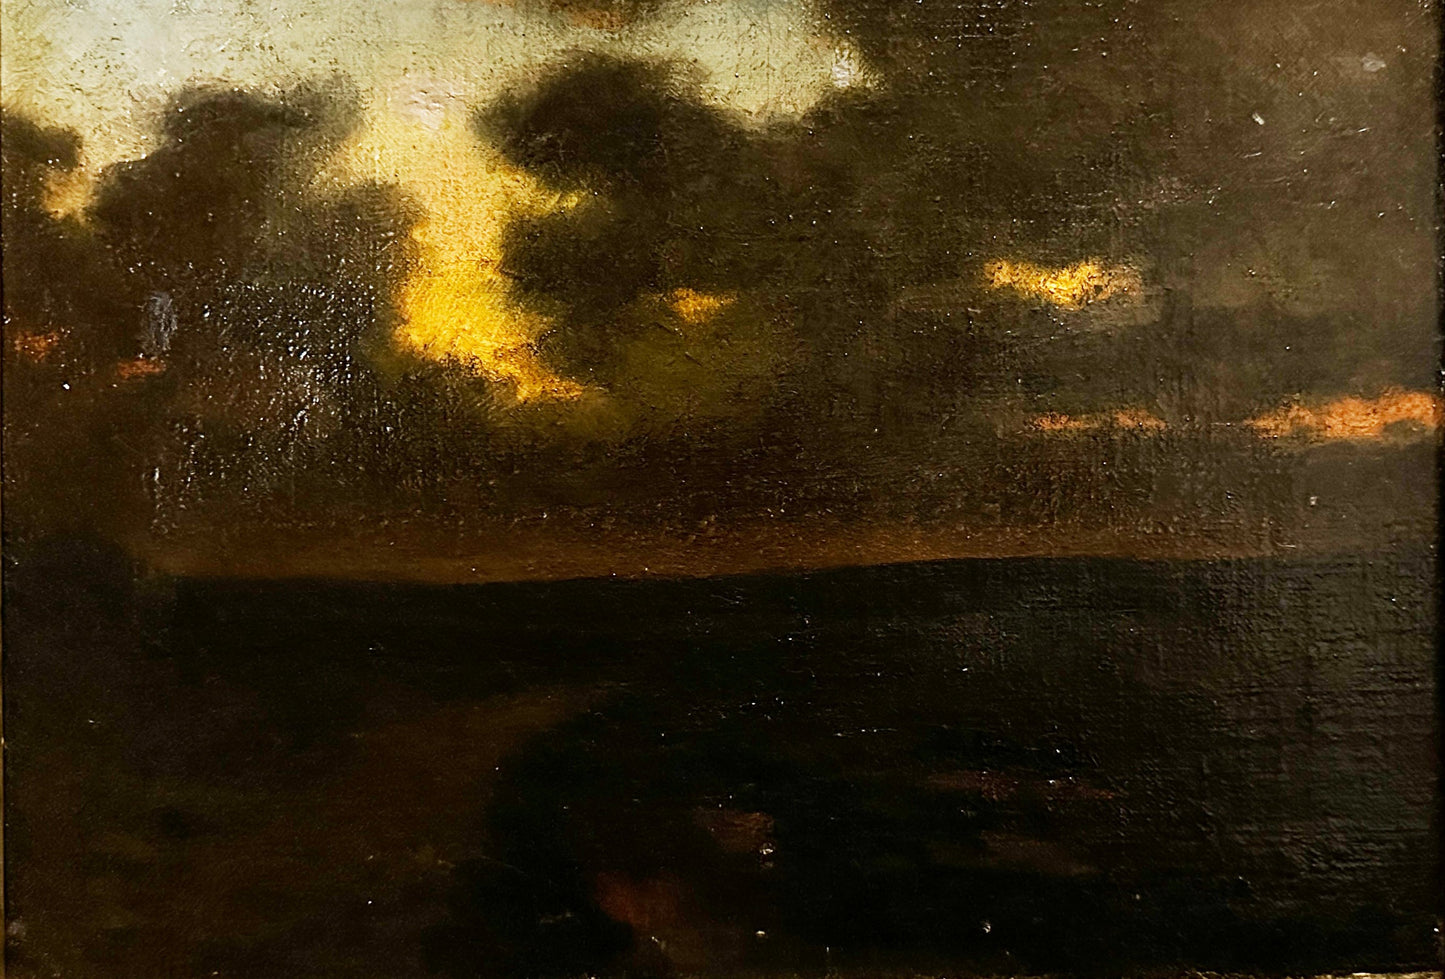 William Anderson Coffin Oil Painting: "Nightfall"